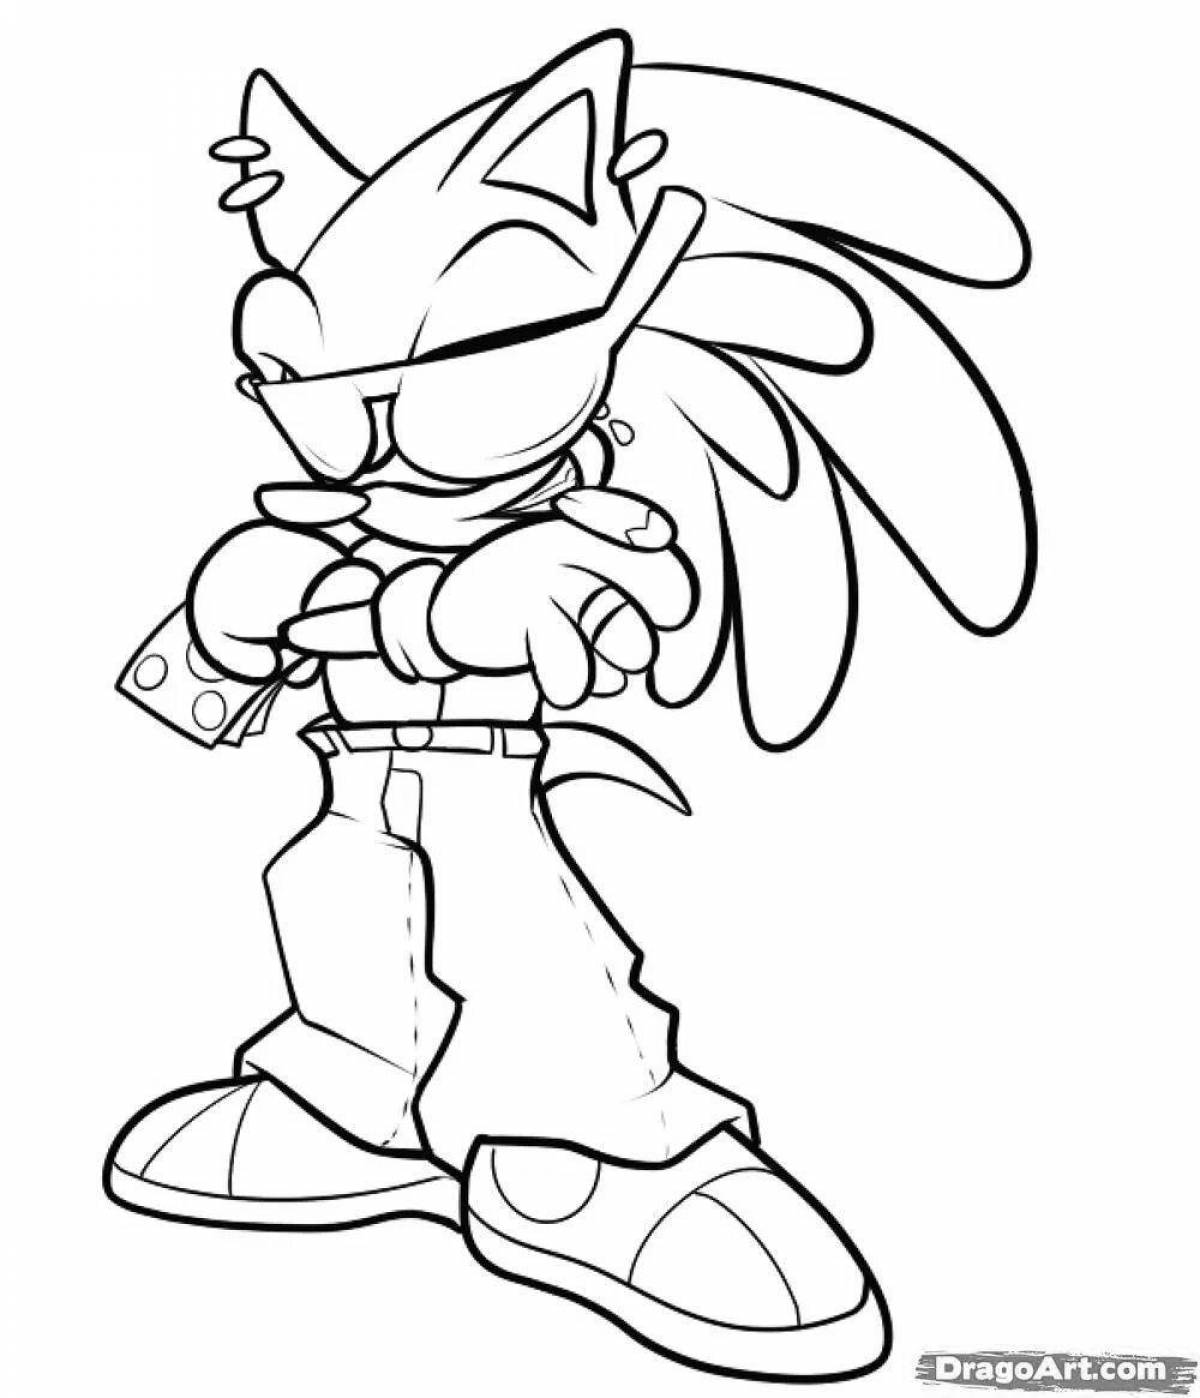 Adorable infinity sonic coloring page